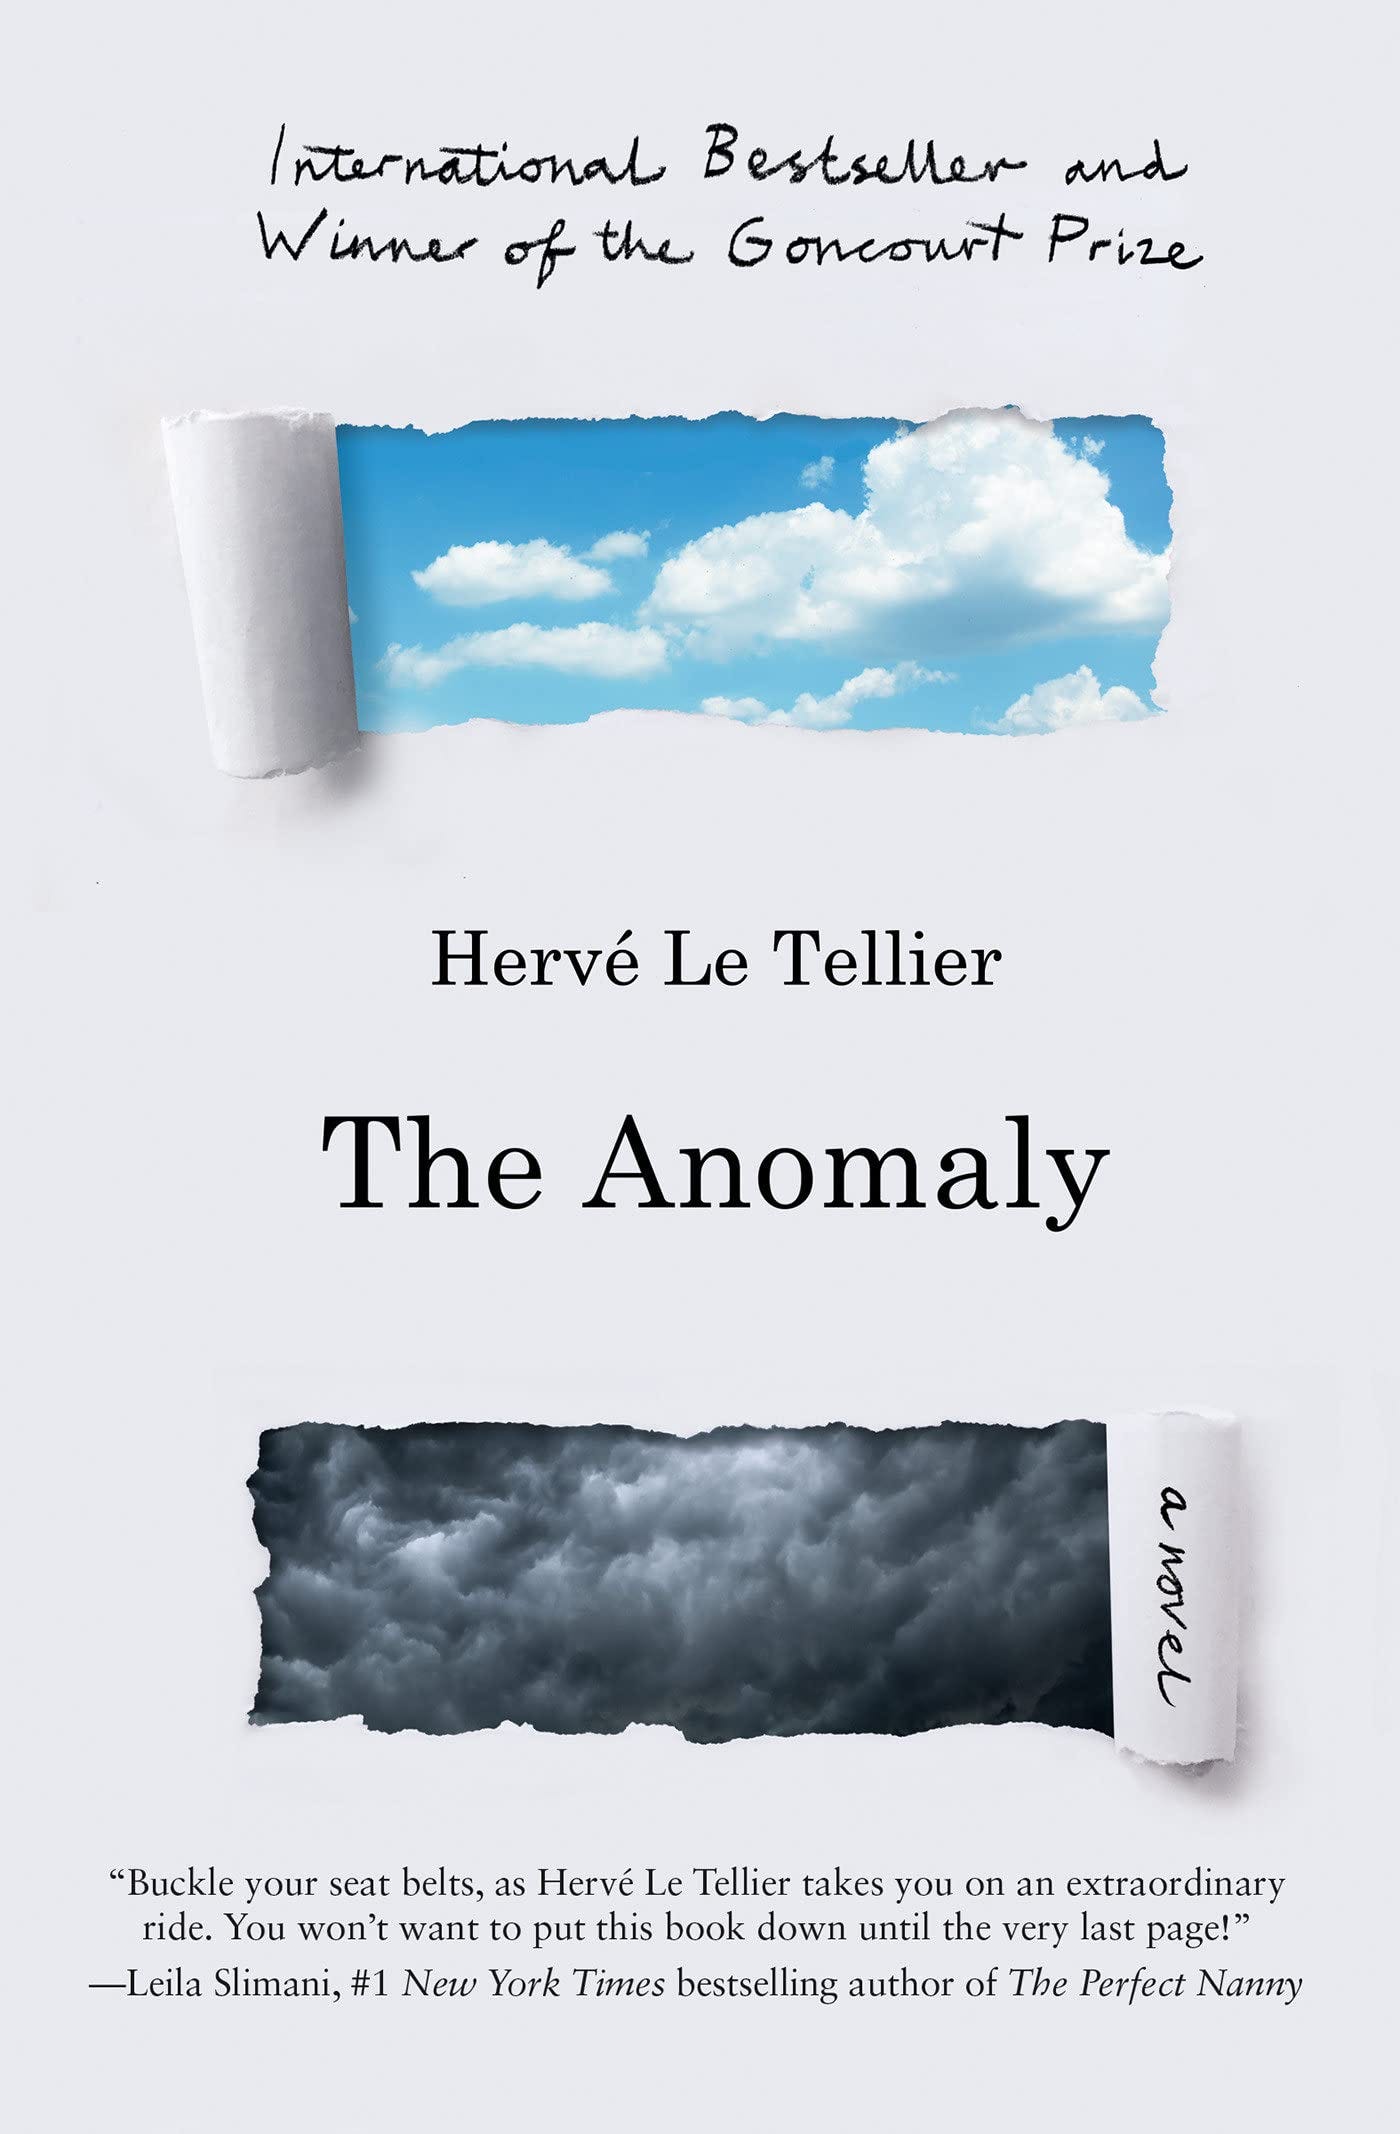 the cover of “The Anomaly” by Herve Le Tellier